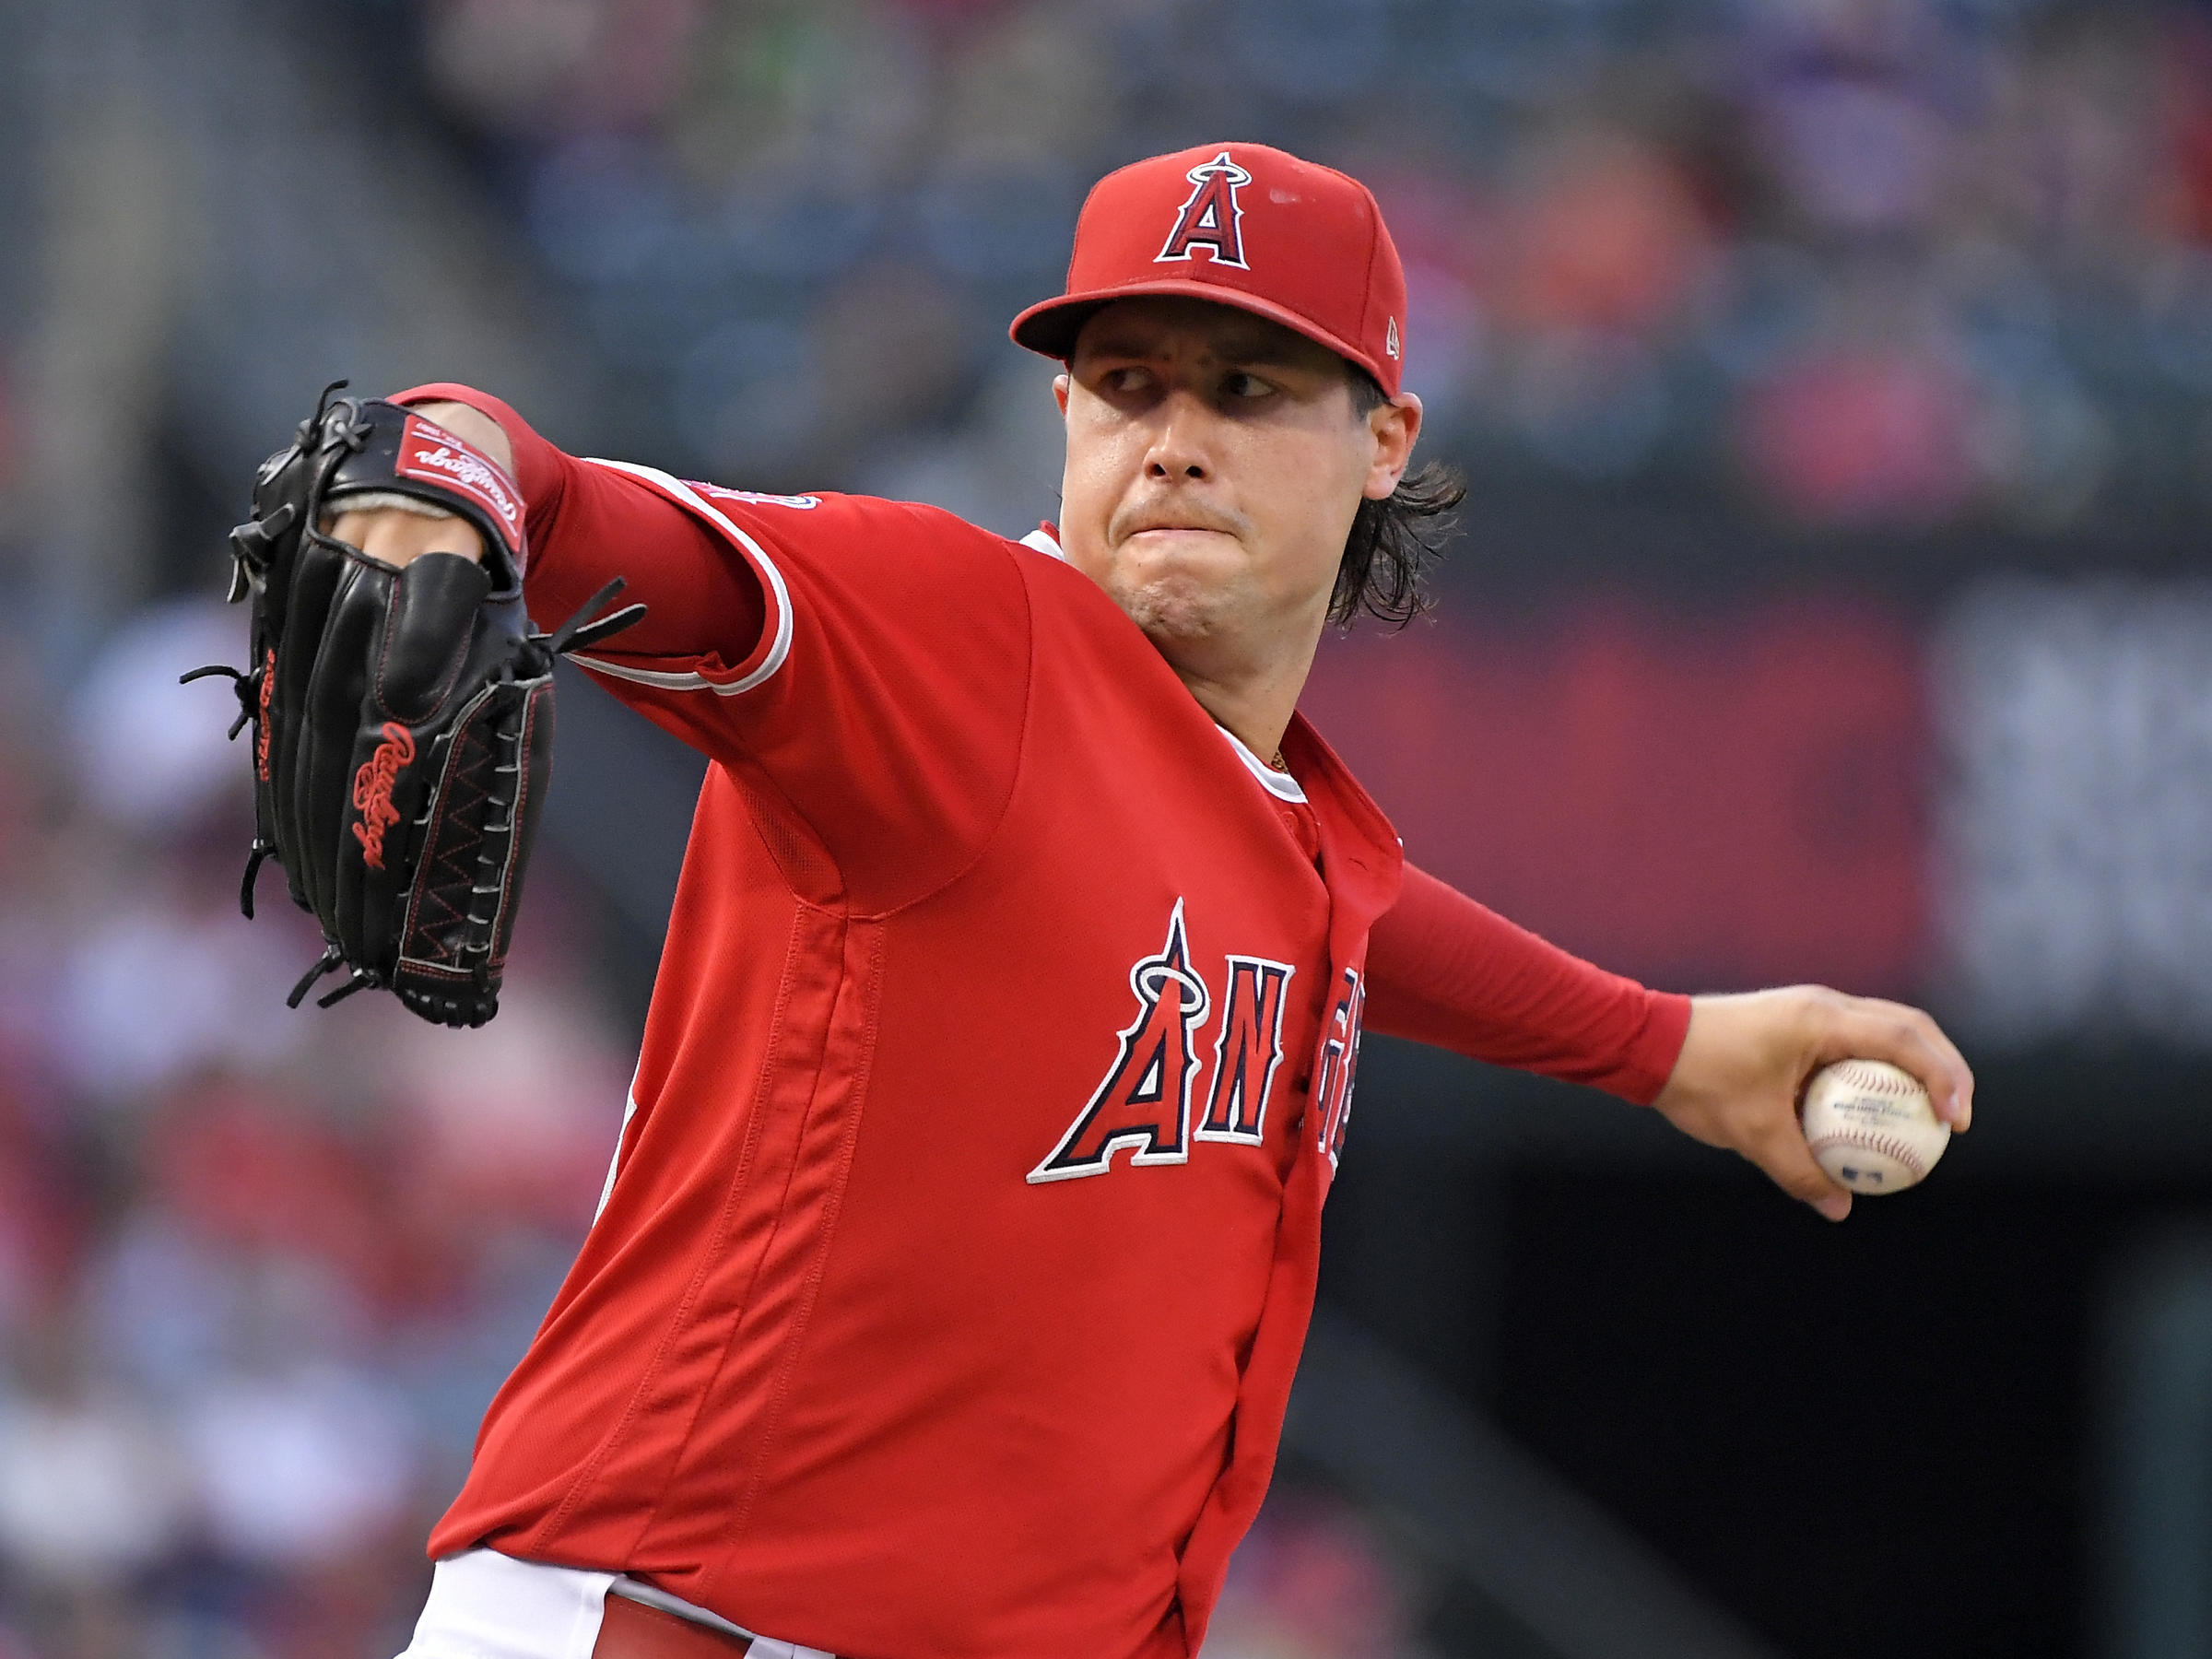 Autopsy Of Los Angeles Angels Pitcher Tyler Skaggs Reveals Opioids And ...